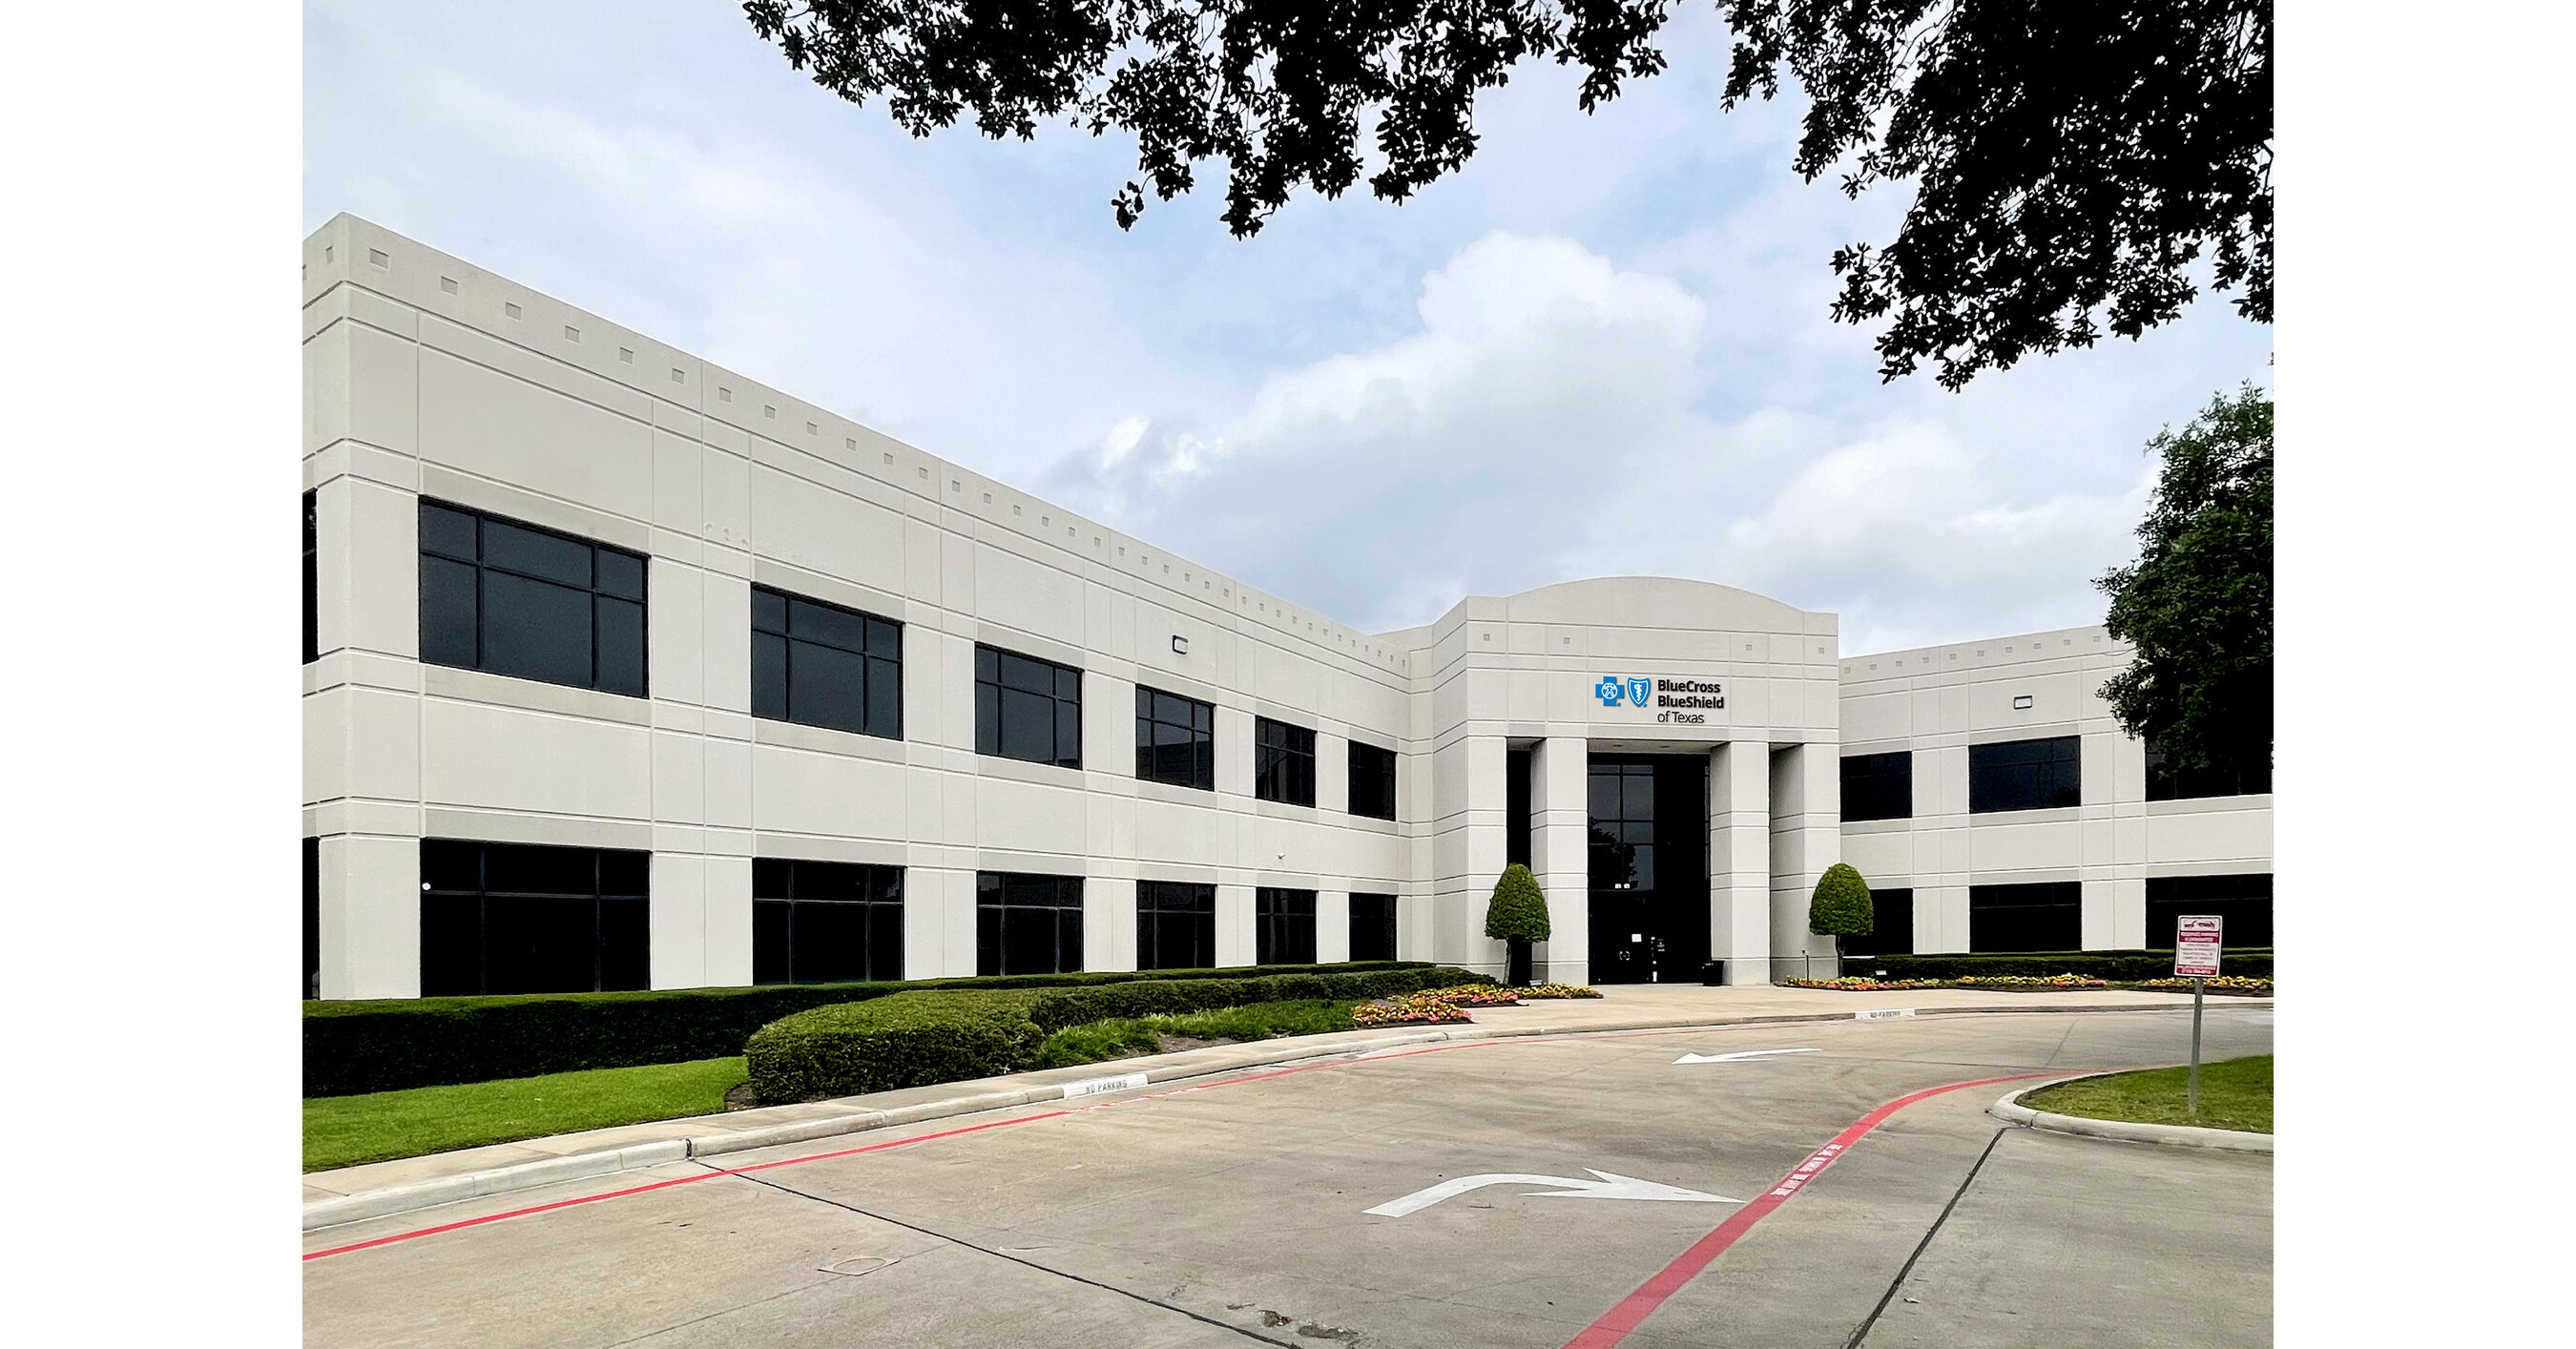 Health Care Service Corporation Expands into Skilled Workforce Communities with New Houston Office